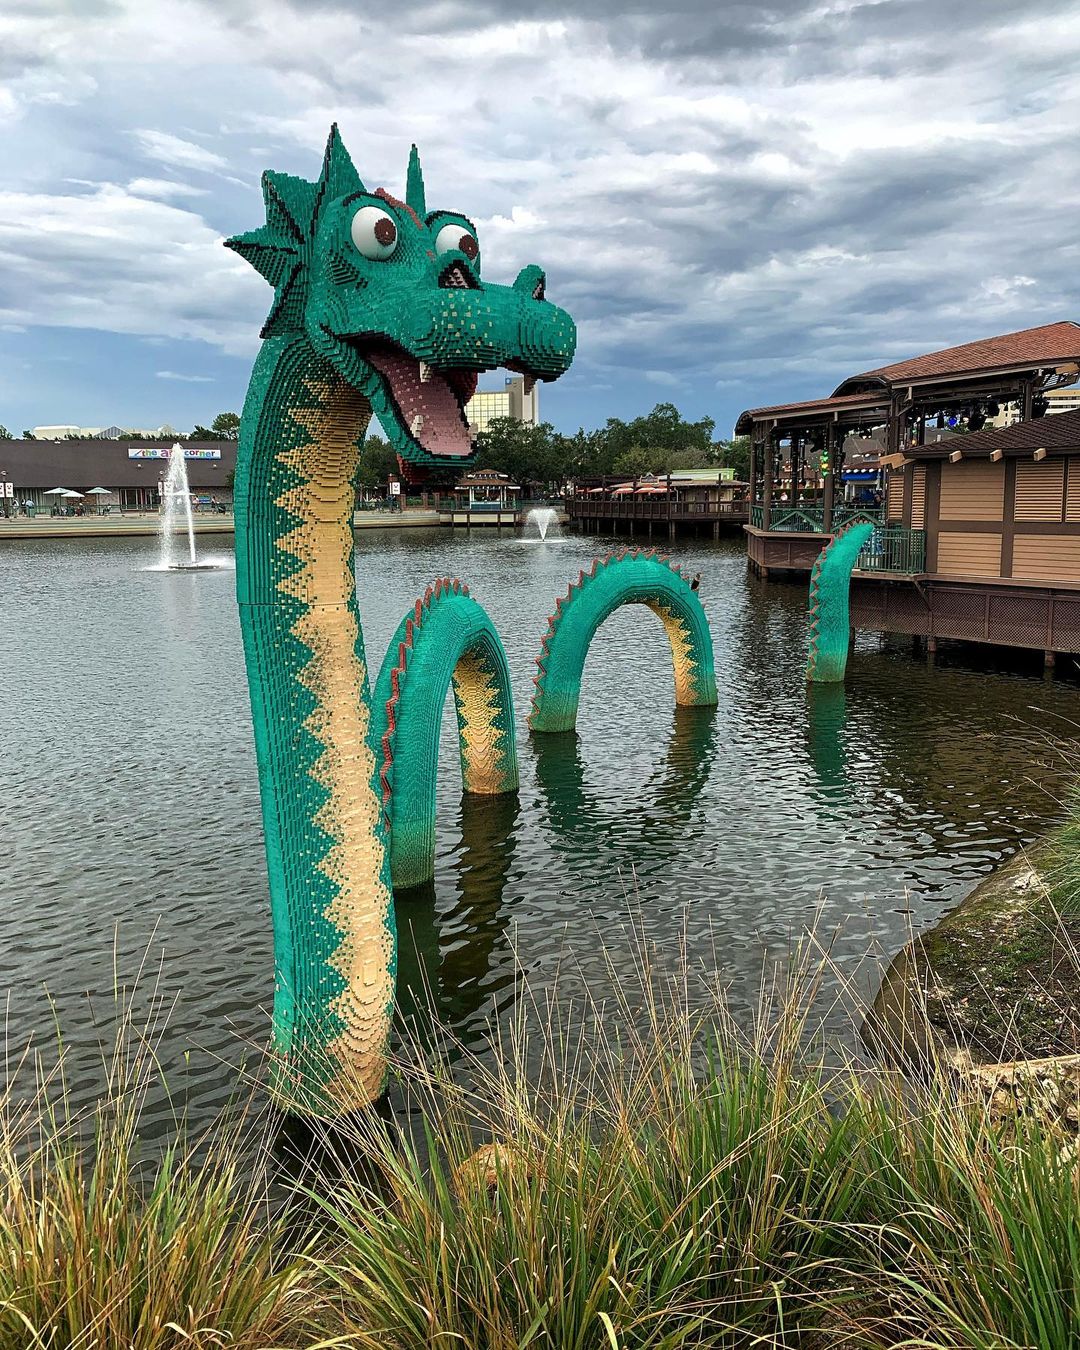 Lego Store at Disney Springs - Orlando Outside the Parks